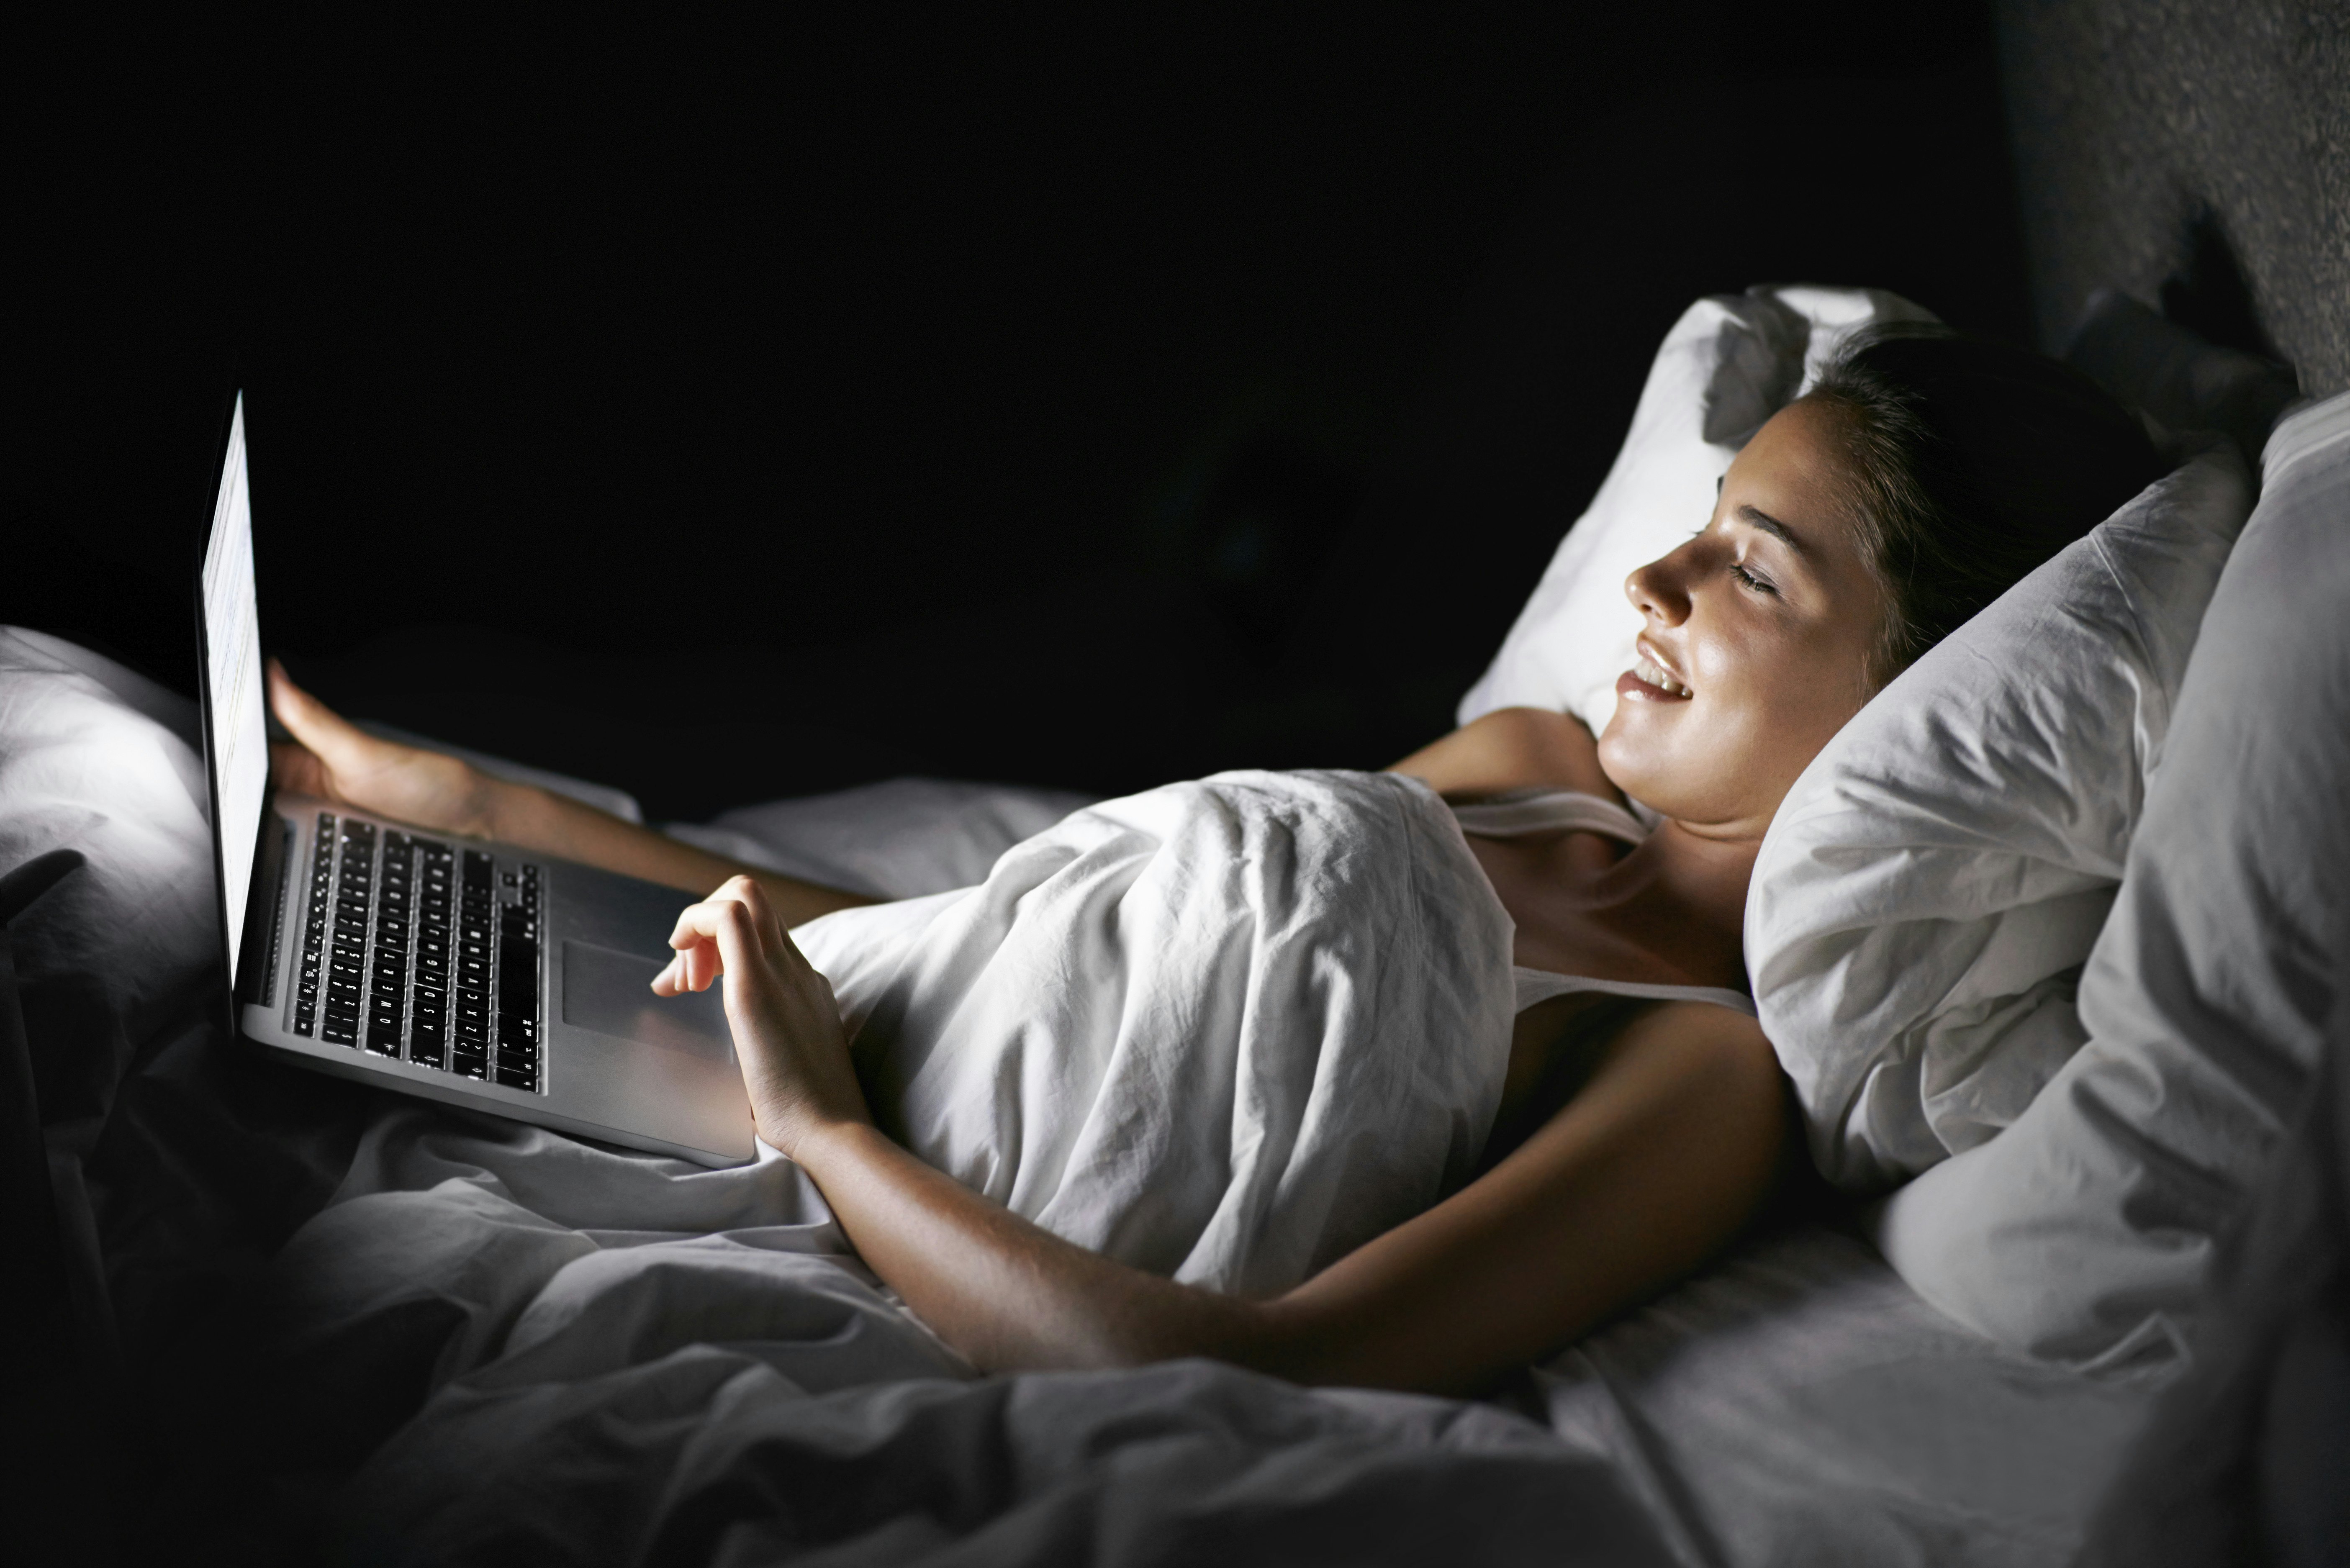 Women Using Porn - There's a Surprising Link Between Watching Porn and Being a ...